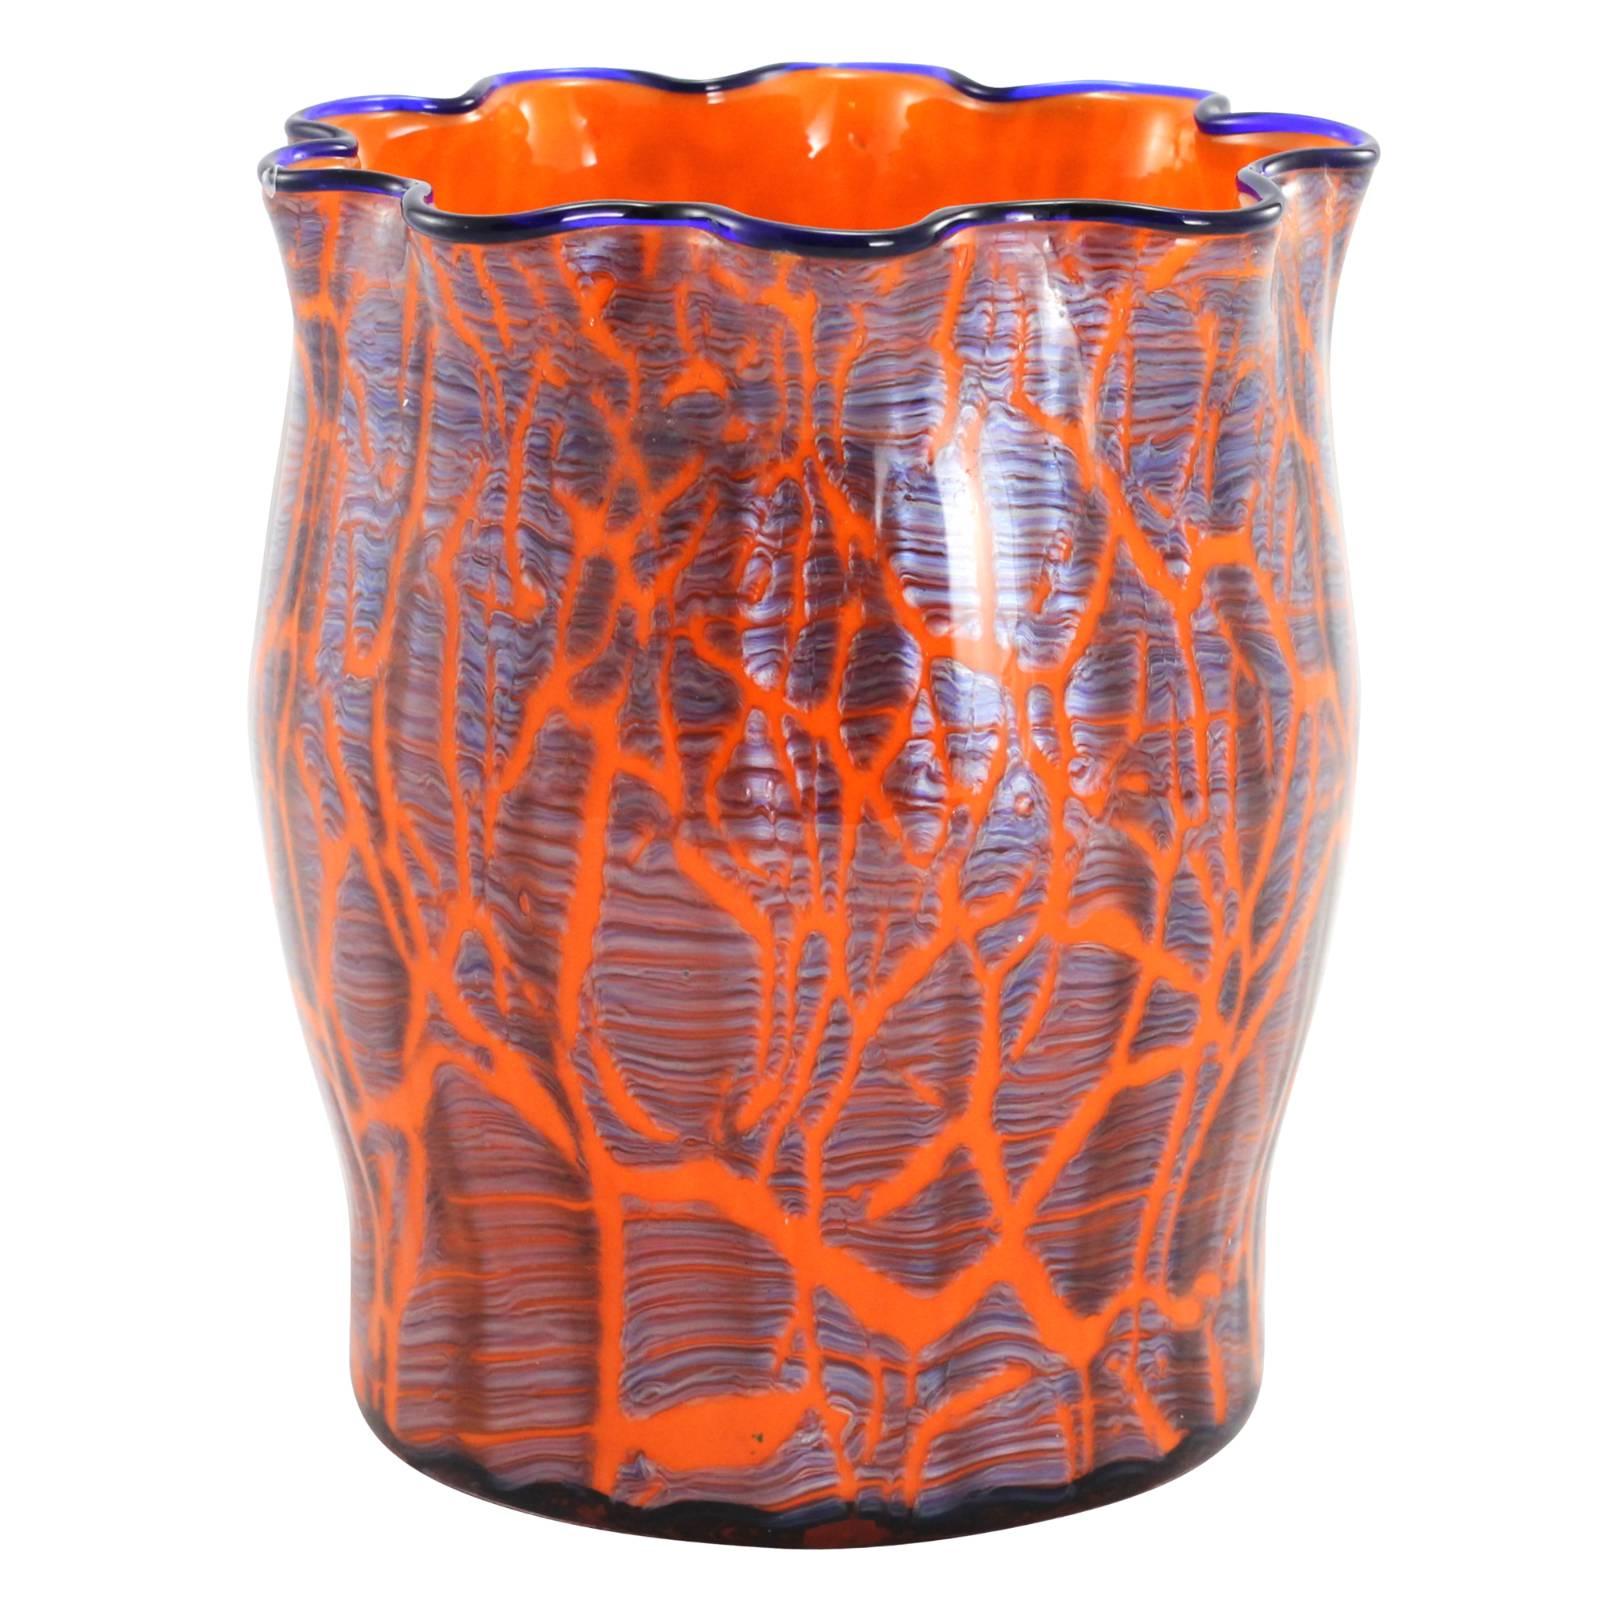 An early 20th century Bohemian art deco glass vase by famed European glassmakers, Loetz. Completed with an orange ground and cobalt blue rim; the vase is decorated with an overlaid steel grey crackle layer from the 'Ausfuehrung 134' decor. Because